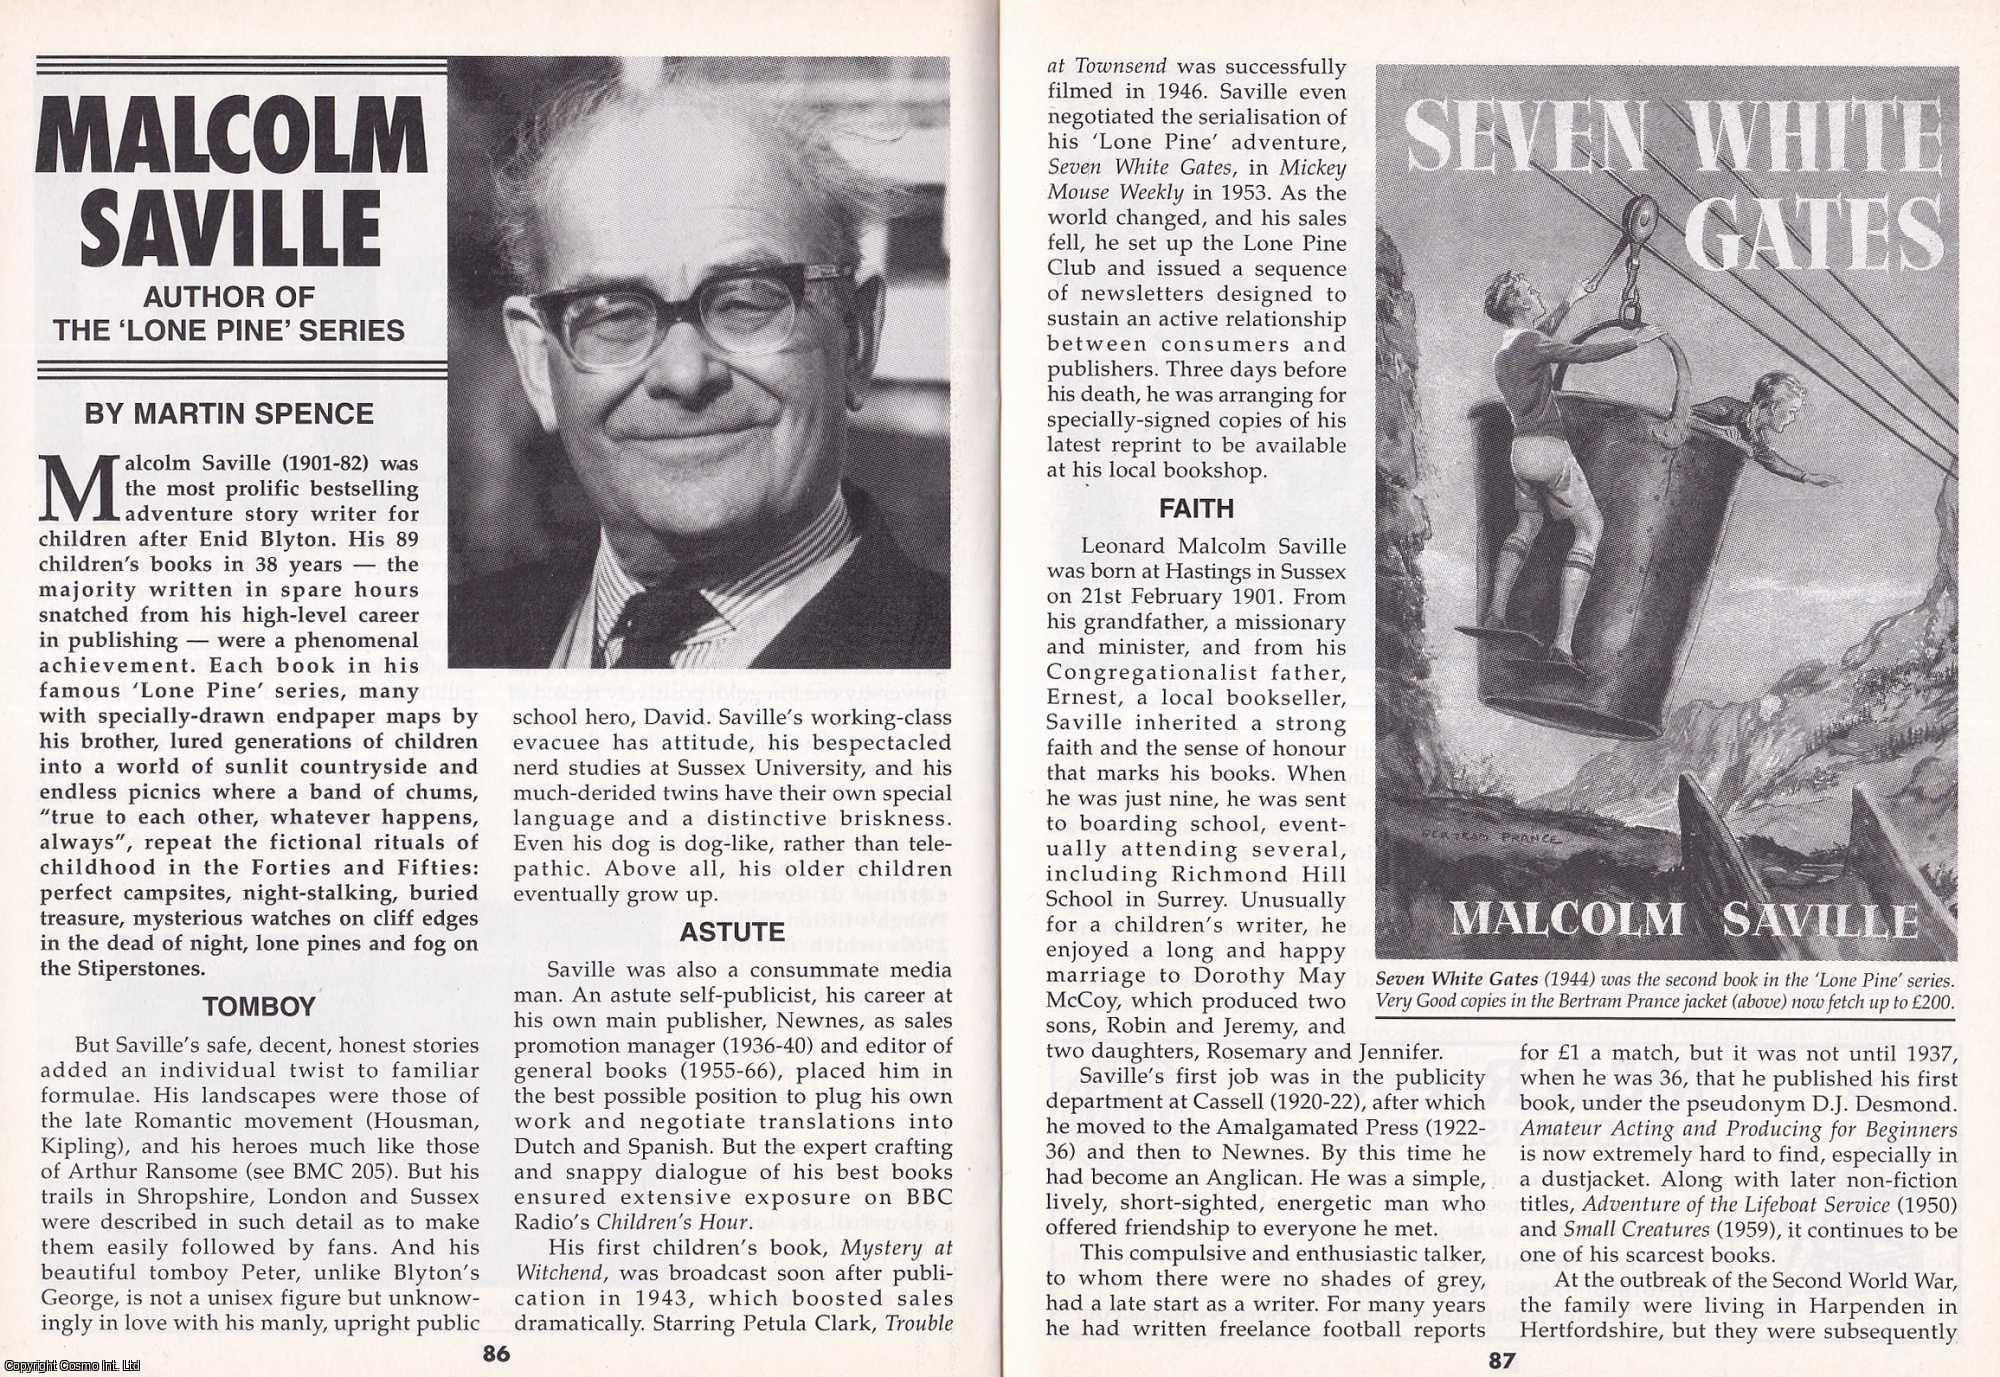 Martin Spence - Malcolm Saville. Author of The Lone Pine Series. This is an original article separated from an issue of The Book & Magazine Collector publication.